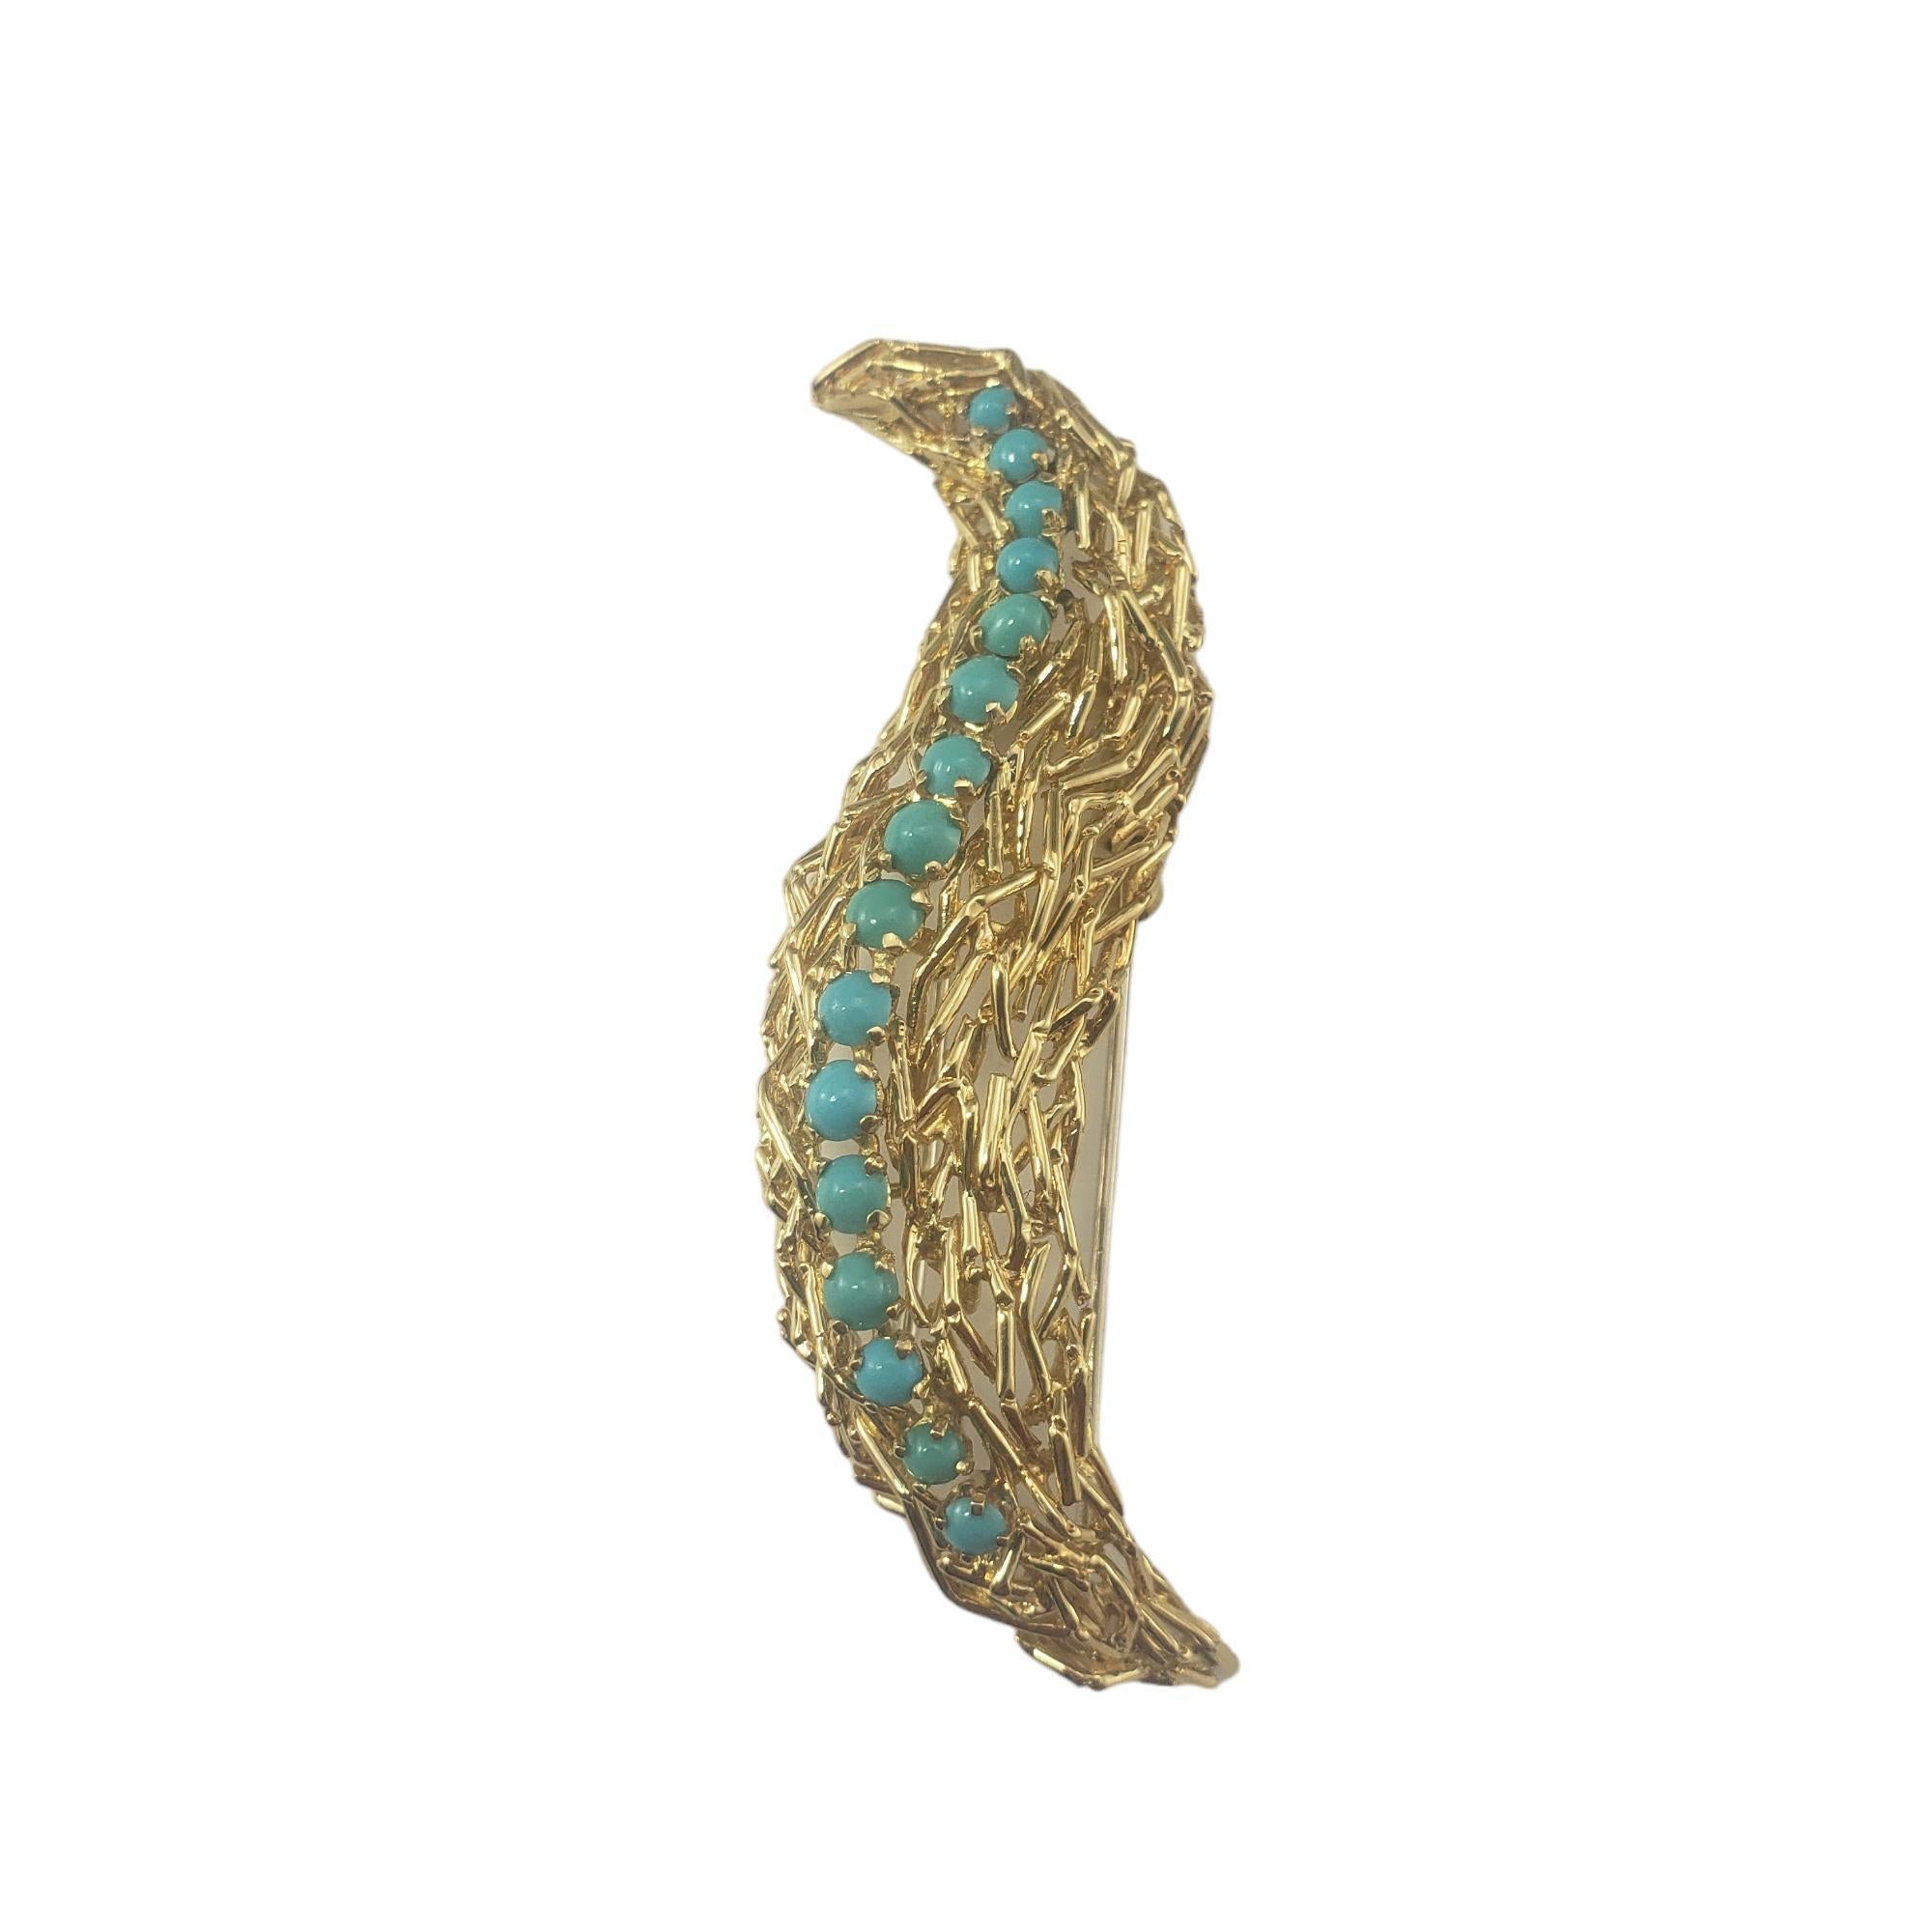 Bead Tiffany & Co. 18 Karat Yellow Gold and Turquoise Brooch/Pin #16802 For Sale